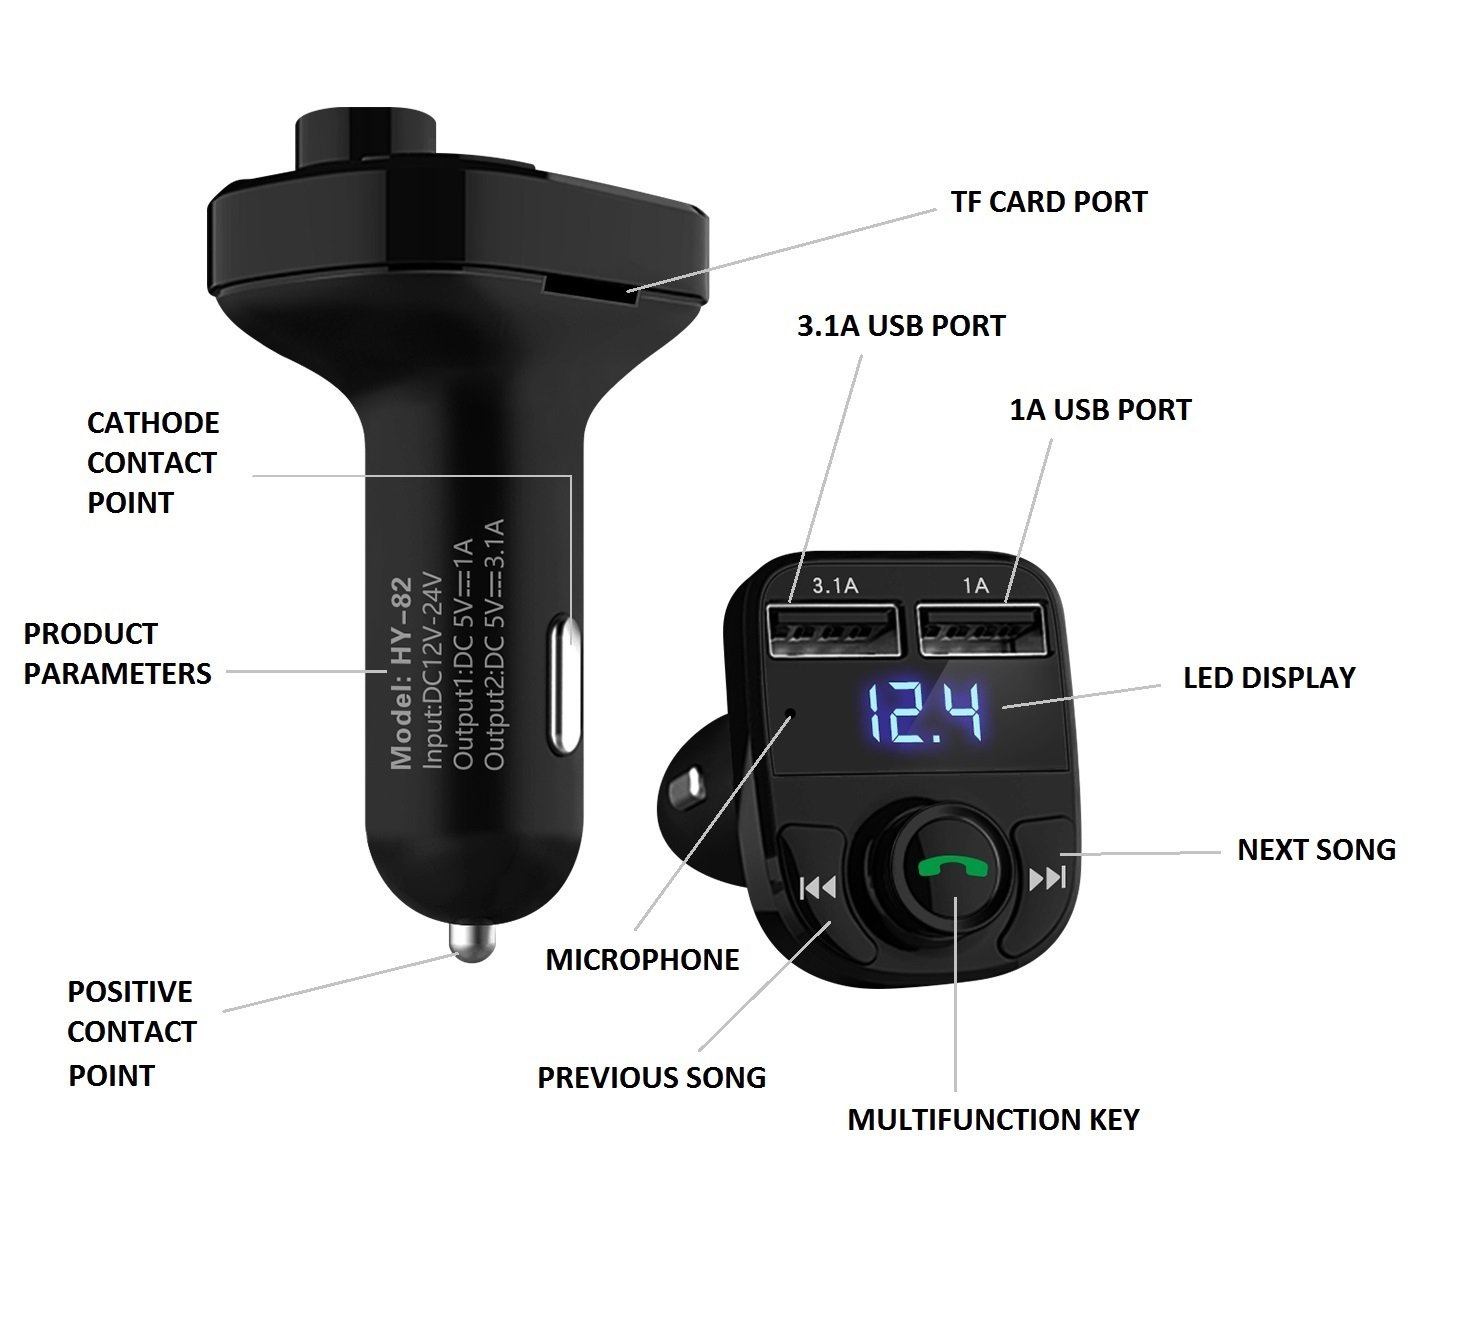 Handsfree Call Car Charger,Wireless Bluetooth FM Transmitter Radio Receiver,Mp3 Audio Music Stereo Adapter,Dual USB Port Charger Compatible for All Smartphones,Samsung Galaxy,LG,HTC,etc.